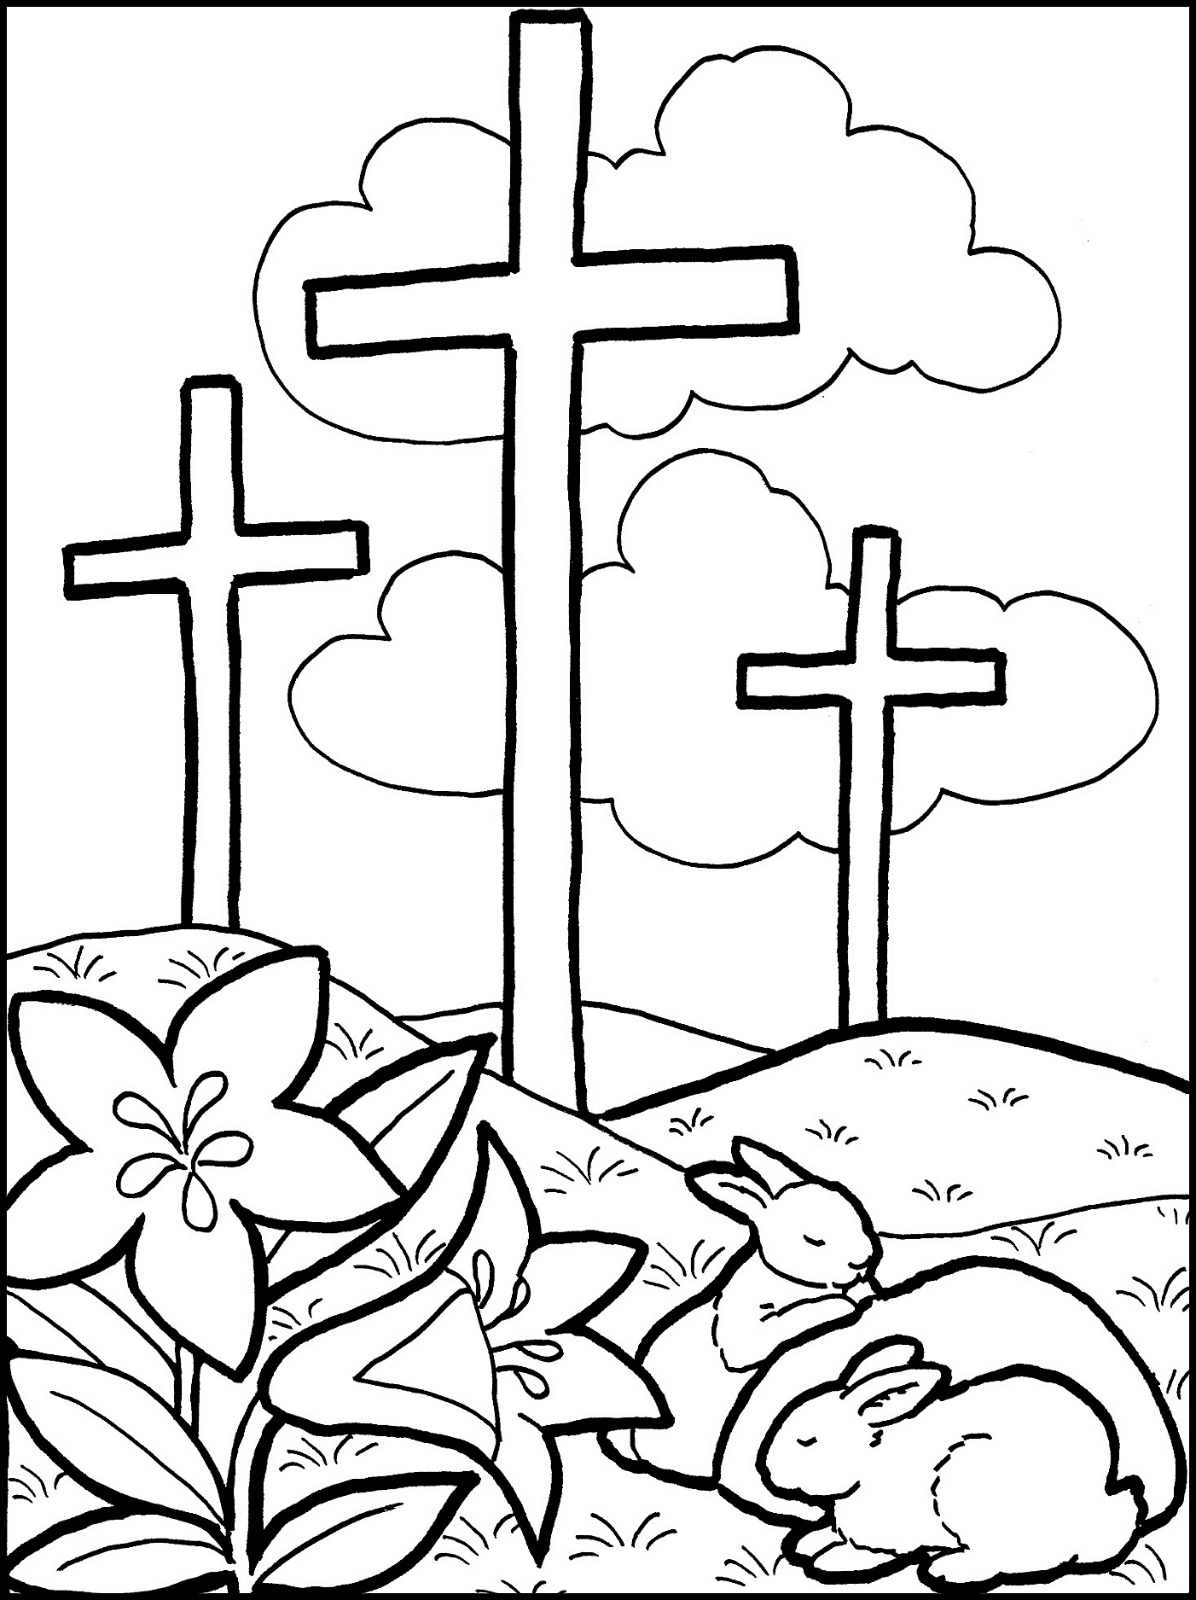 Easter Sunday School Coloring Pages at GetDrawings | Free ...